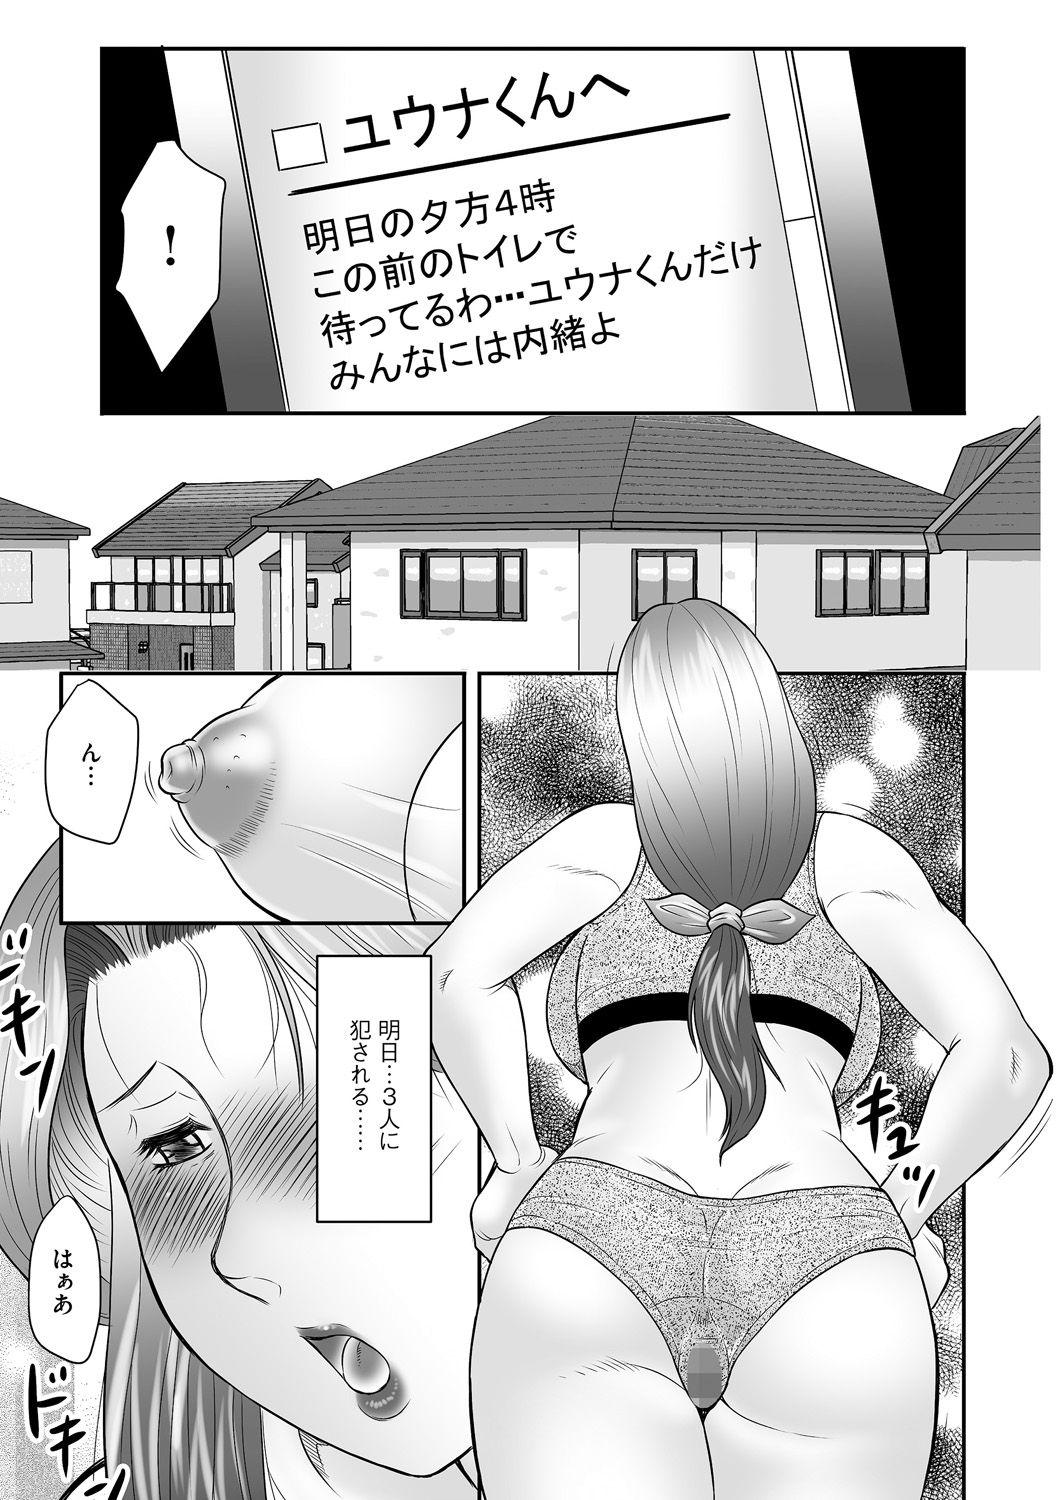 Boshi no Susume - The advice of the mother and child Ch. 11 10